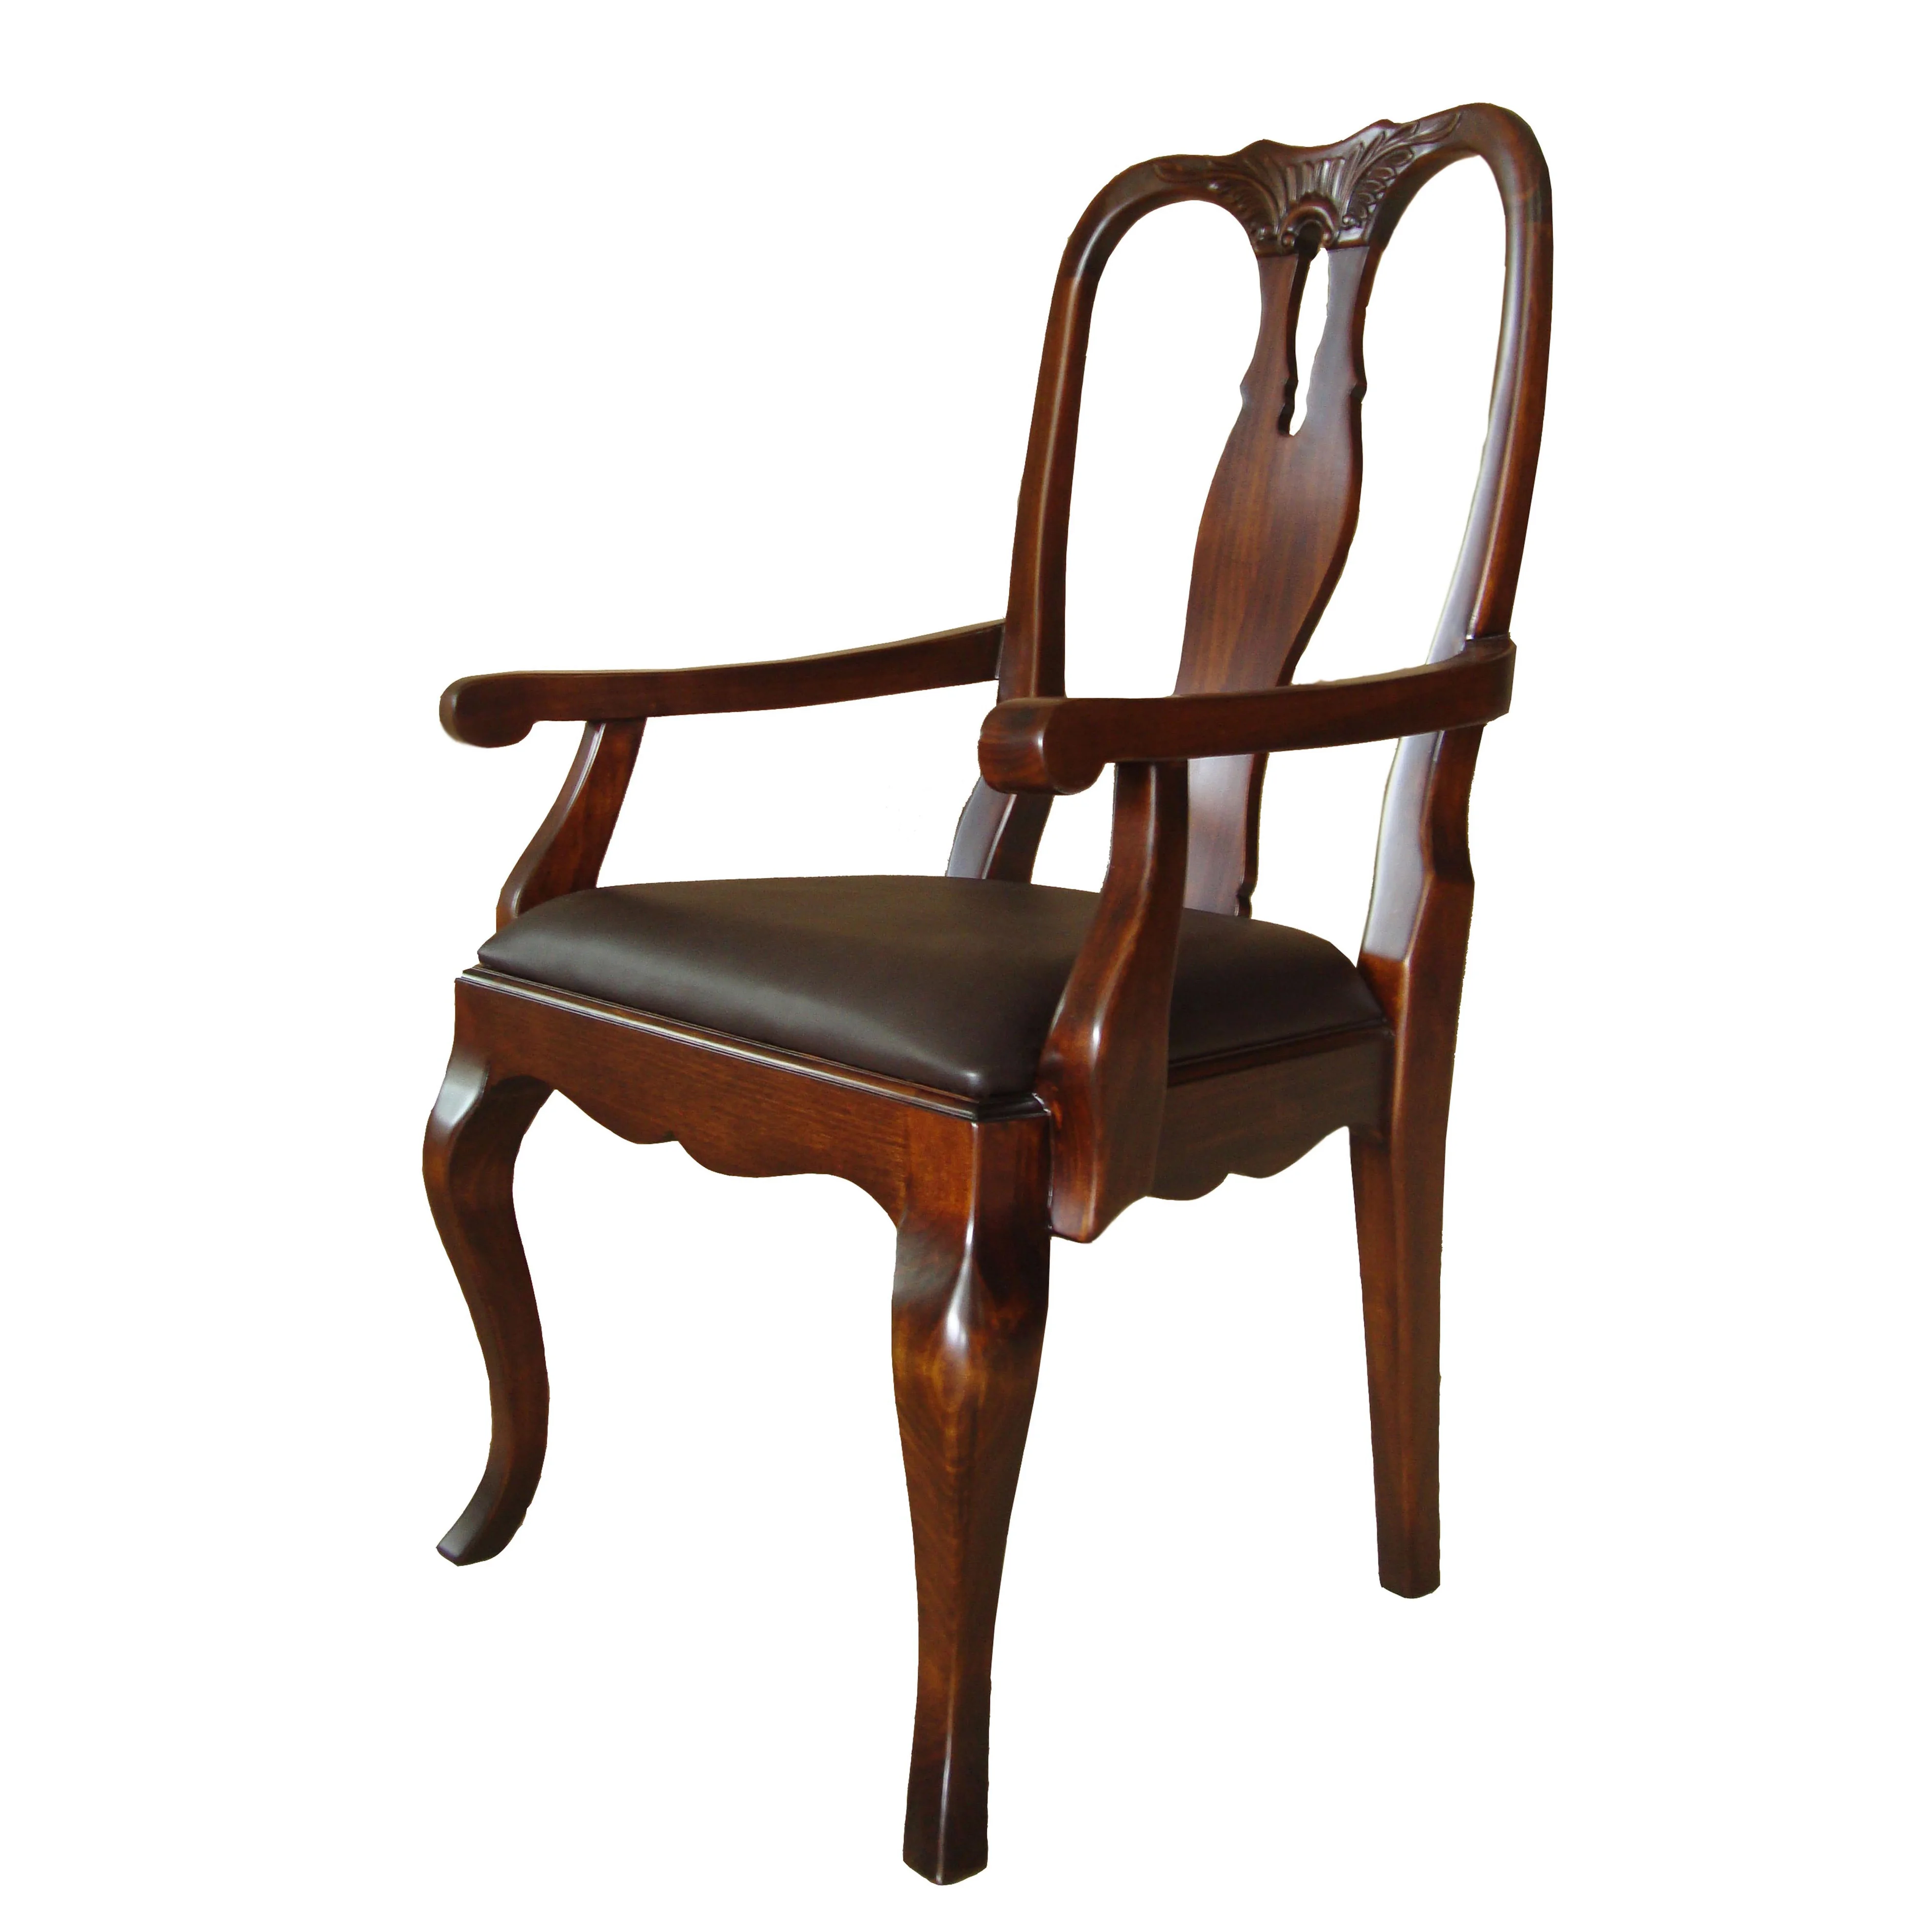 Vietnam Furniture Classic Designs Carved Acacia Wood Dining Chair Buy Wood Dining Chair